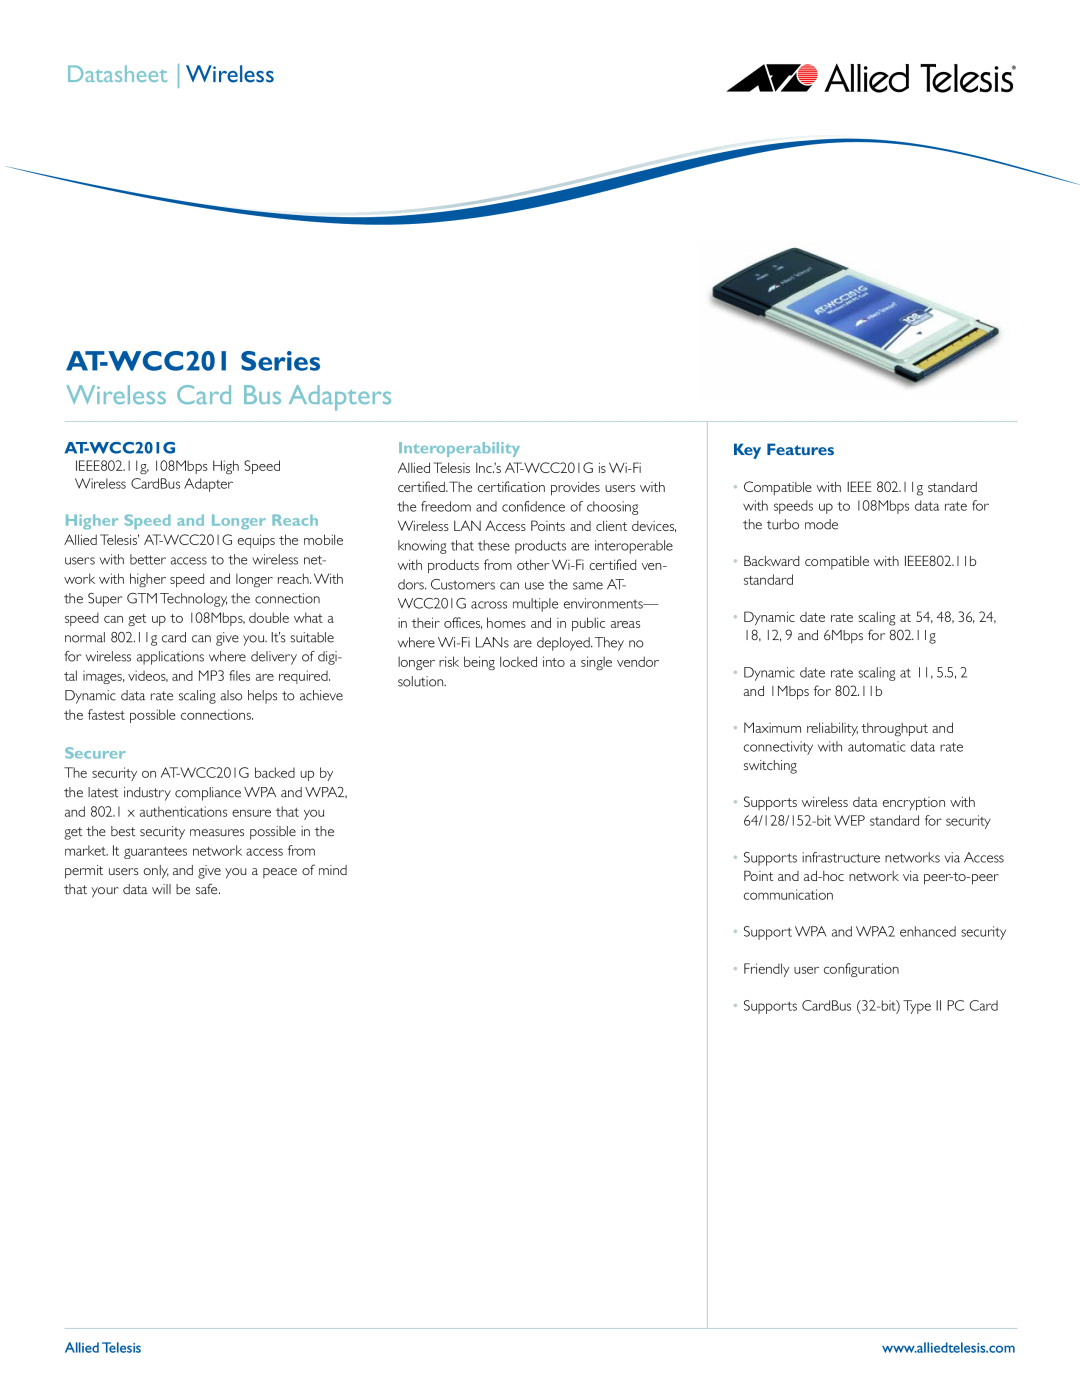 Allied Telesis AT-WCC201 Series manual Wireless Card Bus Adapters, AT-WCC201G, Key Features, Datasheet Wireless 